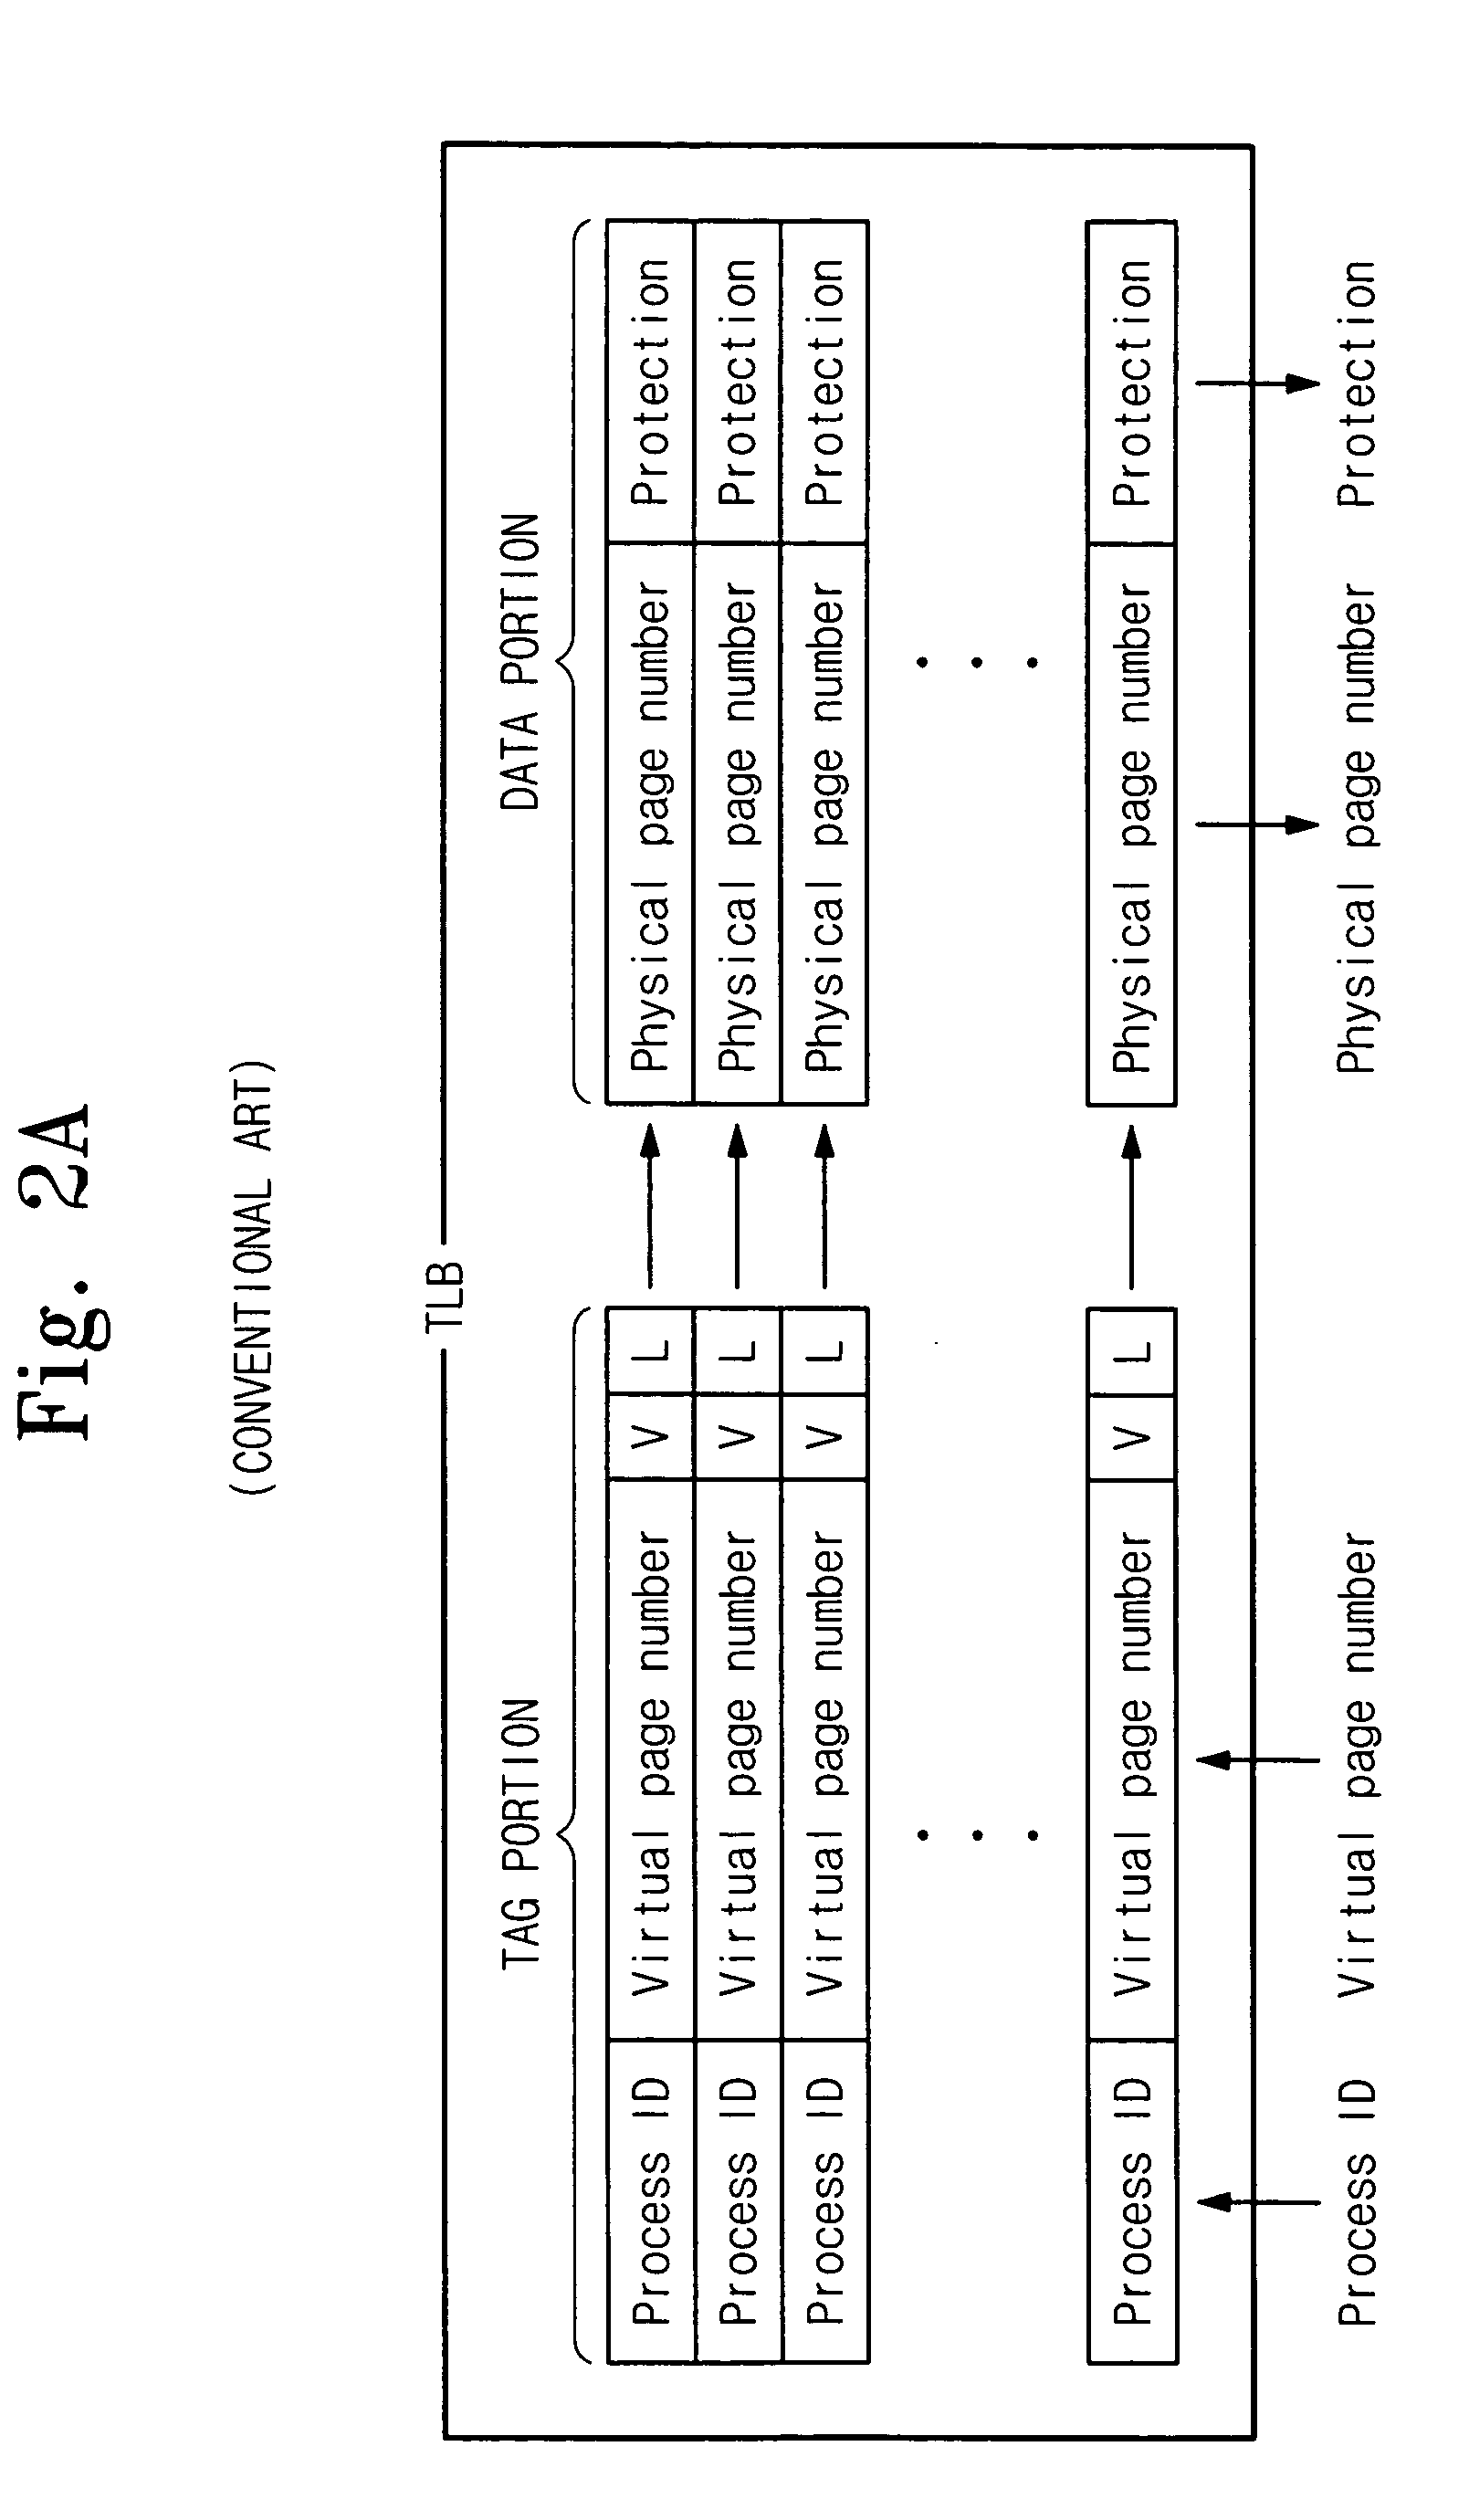 Apparatus and method for simultaneous multi-thread processing